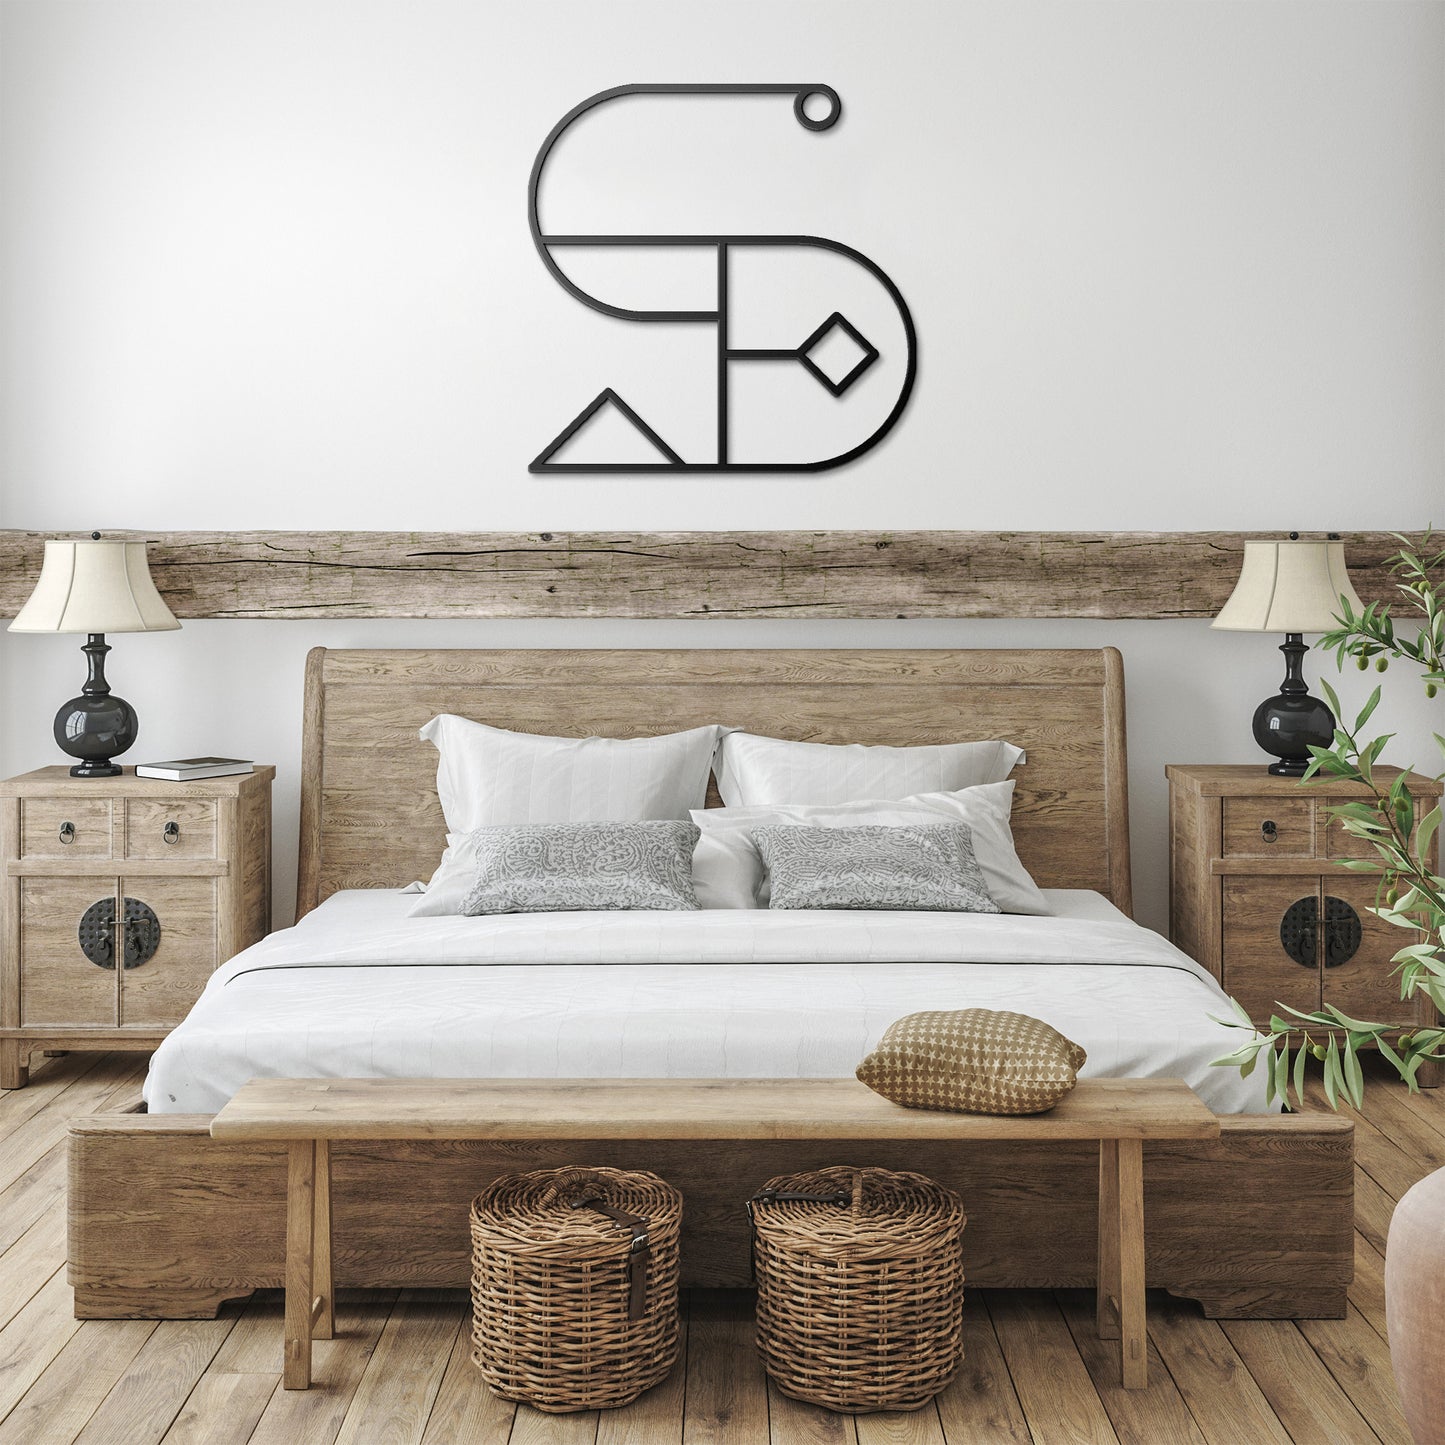 Letter S, Your Initial, Art Deco Letters, Monogram, Metal Signs, Rustic Sign, Wall Art, Wall Decor